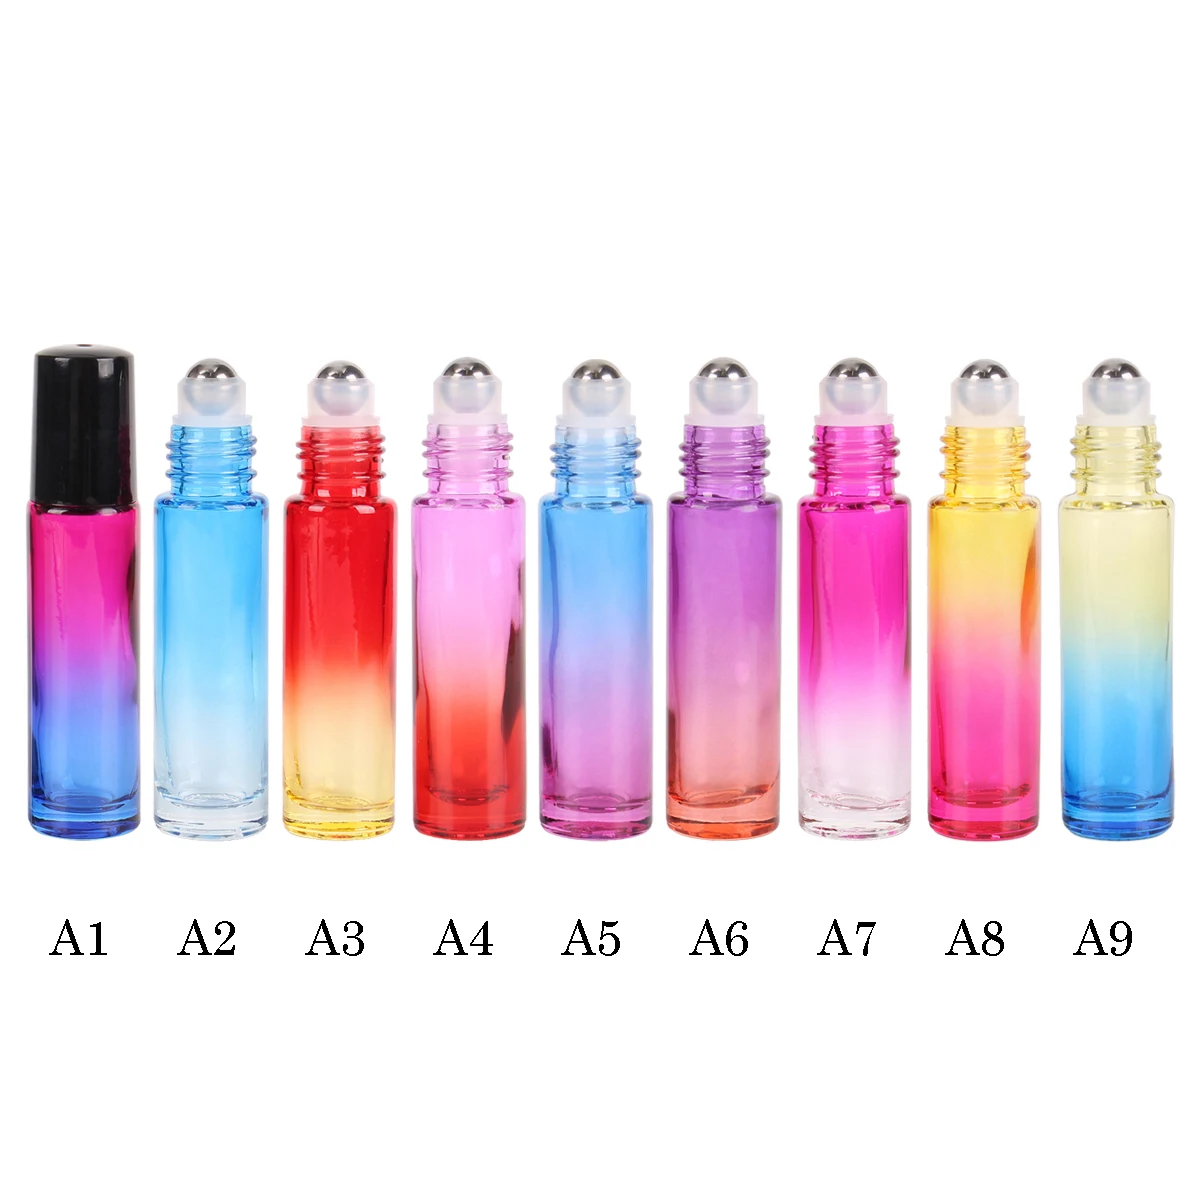 

6/12/24pcs 10ml Glass Roll On Bottle with Stainless Steel Roller Ball for Essential Oils Perfume Aromatherapy 9 Colors U-pick